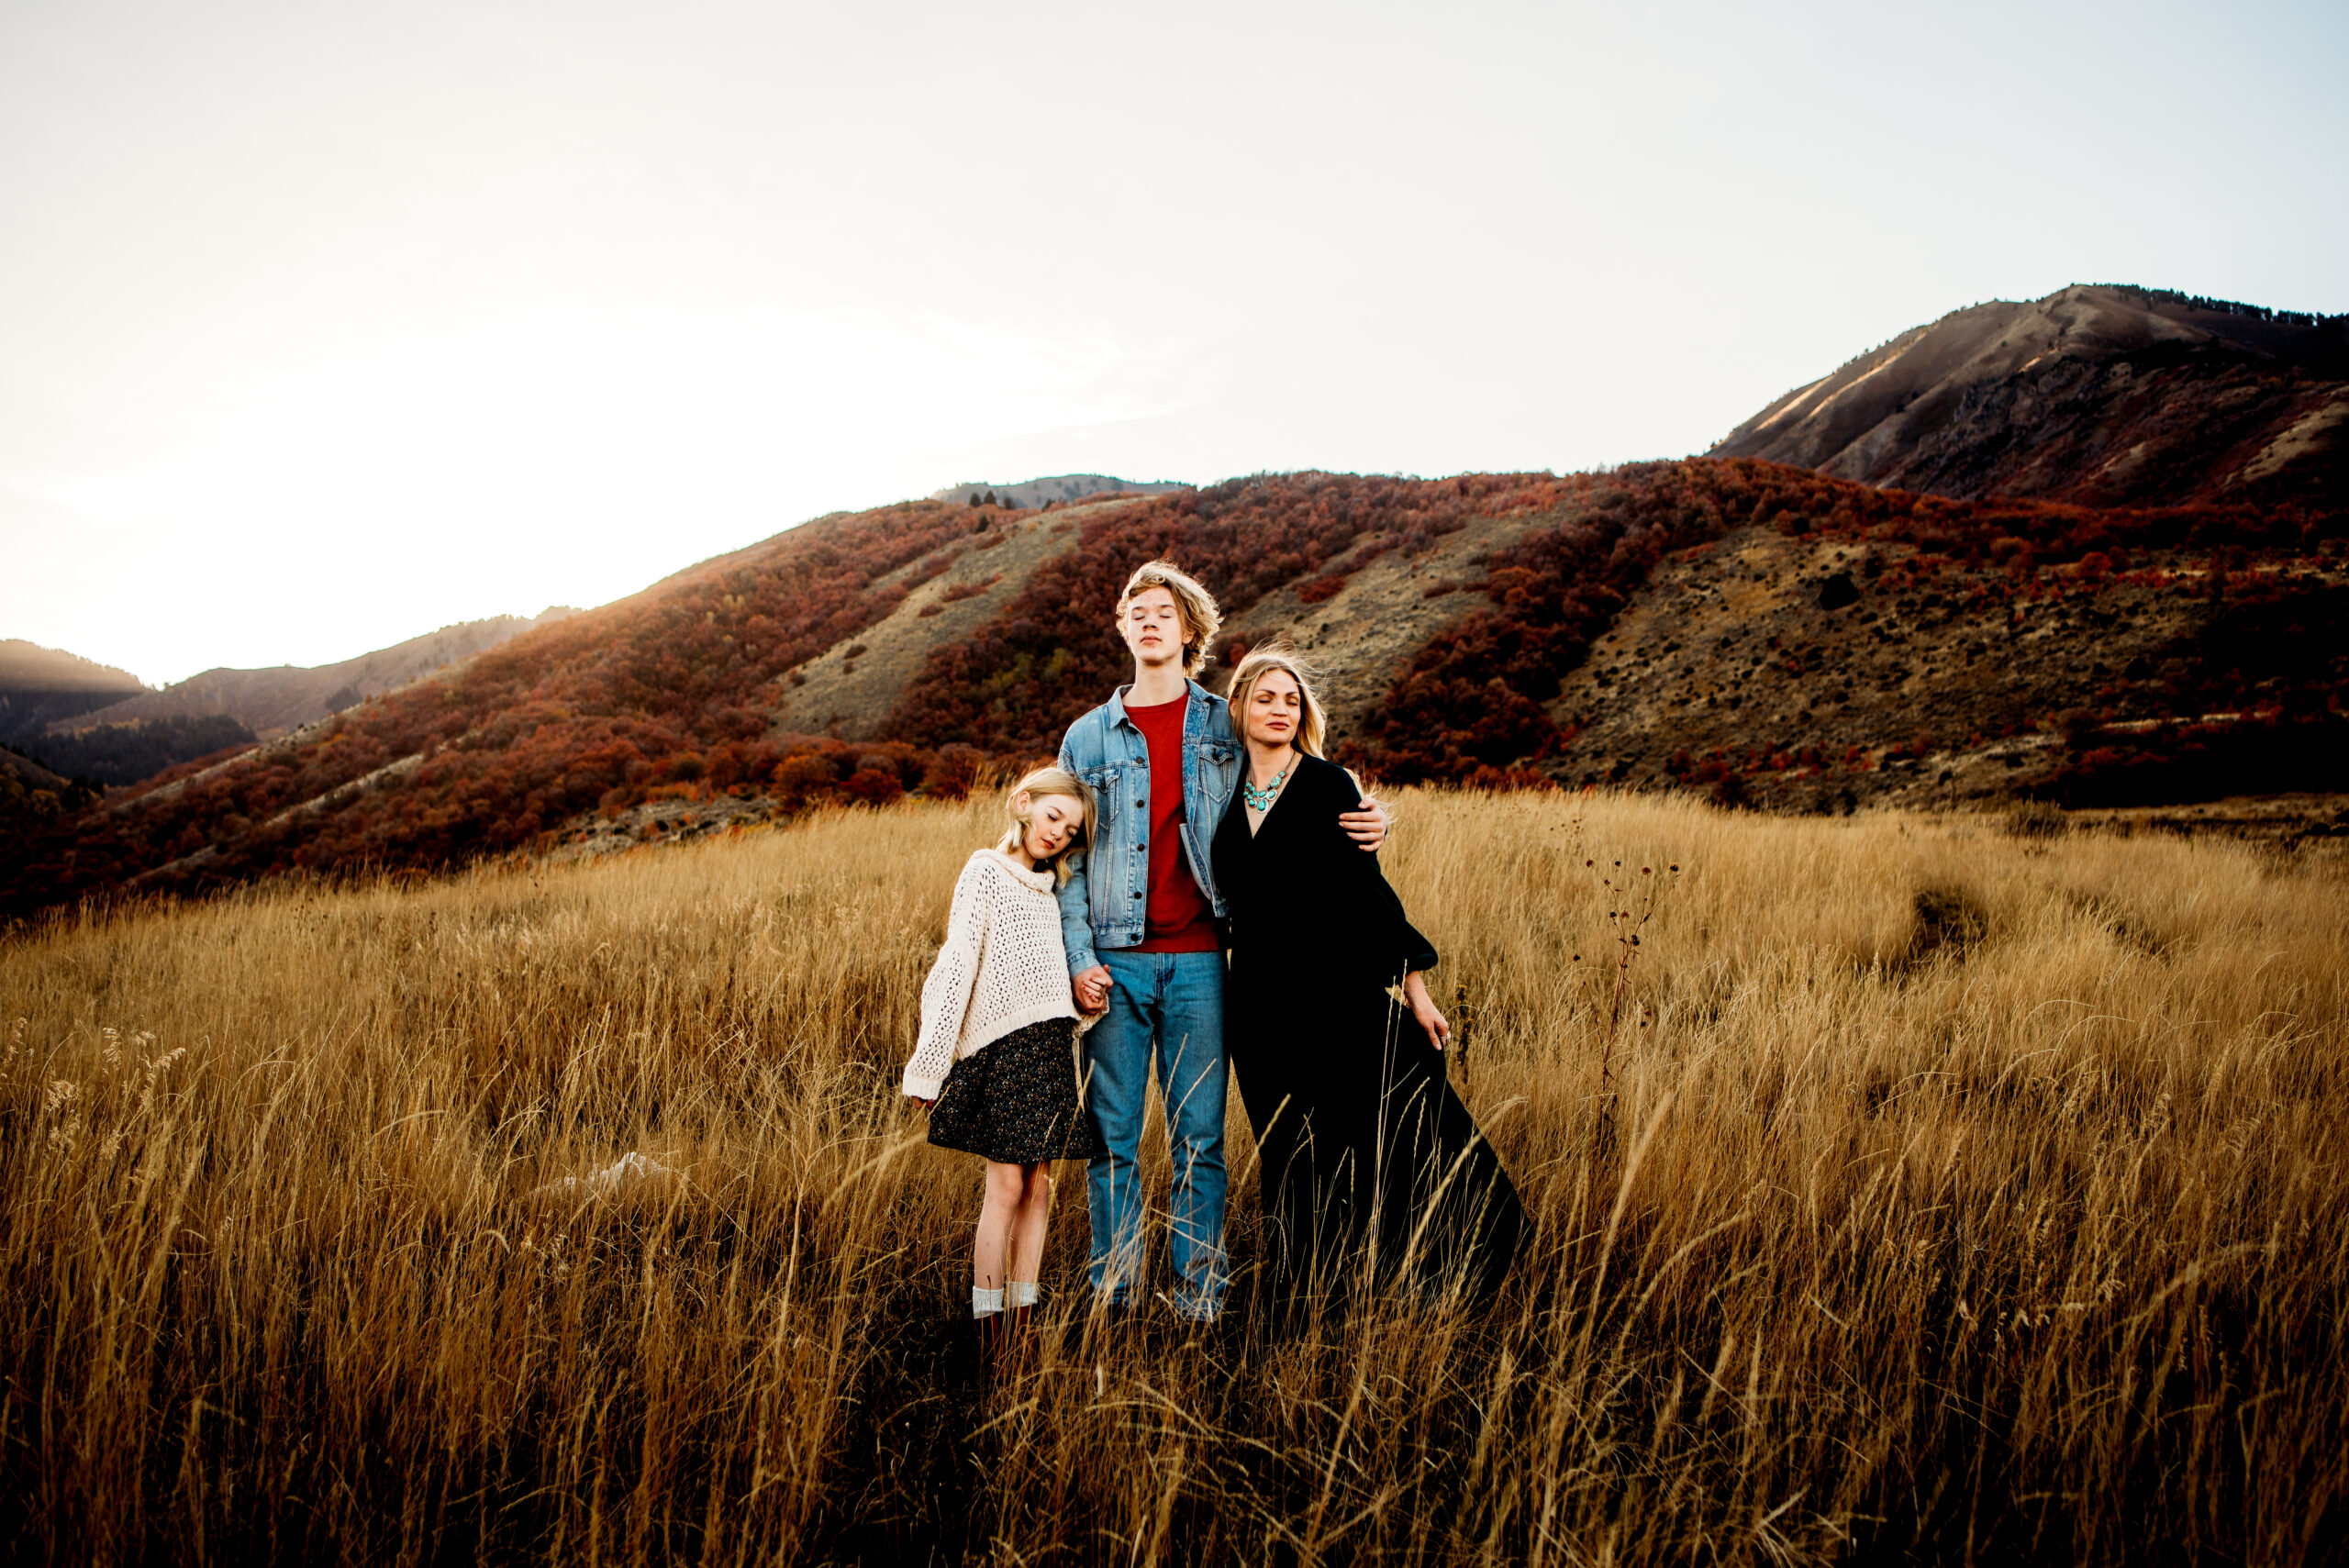 Cream sweater and black dress, dark green dress, jean jacket / Mom embracing son and daughter while looking into distance on hillside / what to wear for family pictures // Photo by Katie Blakeley Creative of Utah. See more at katieblakeley.com/blog